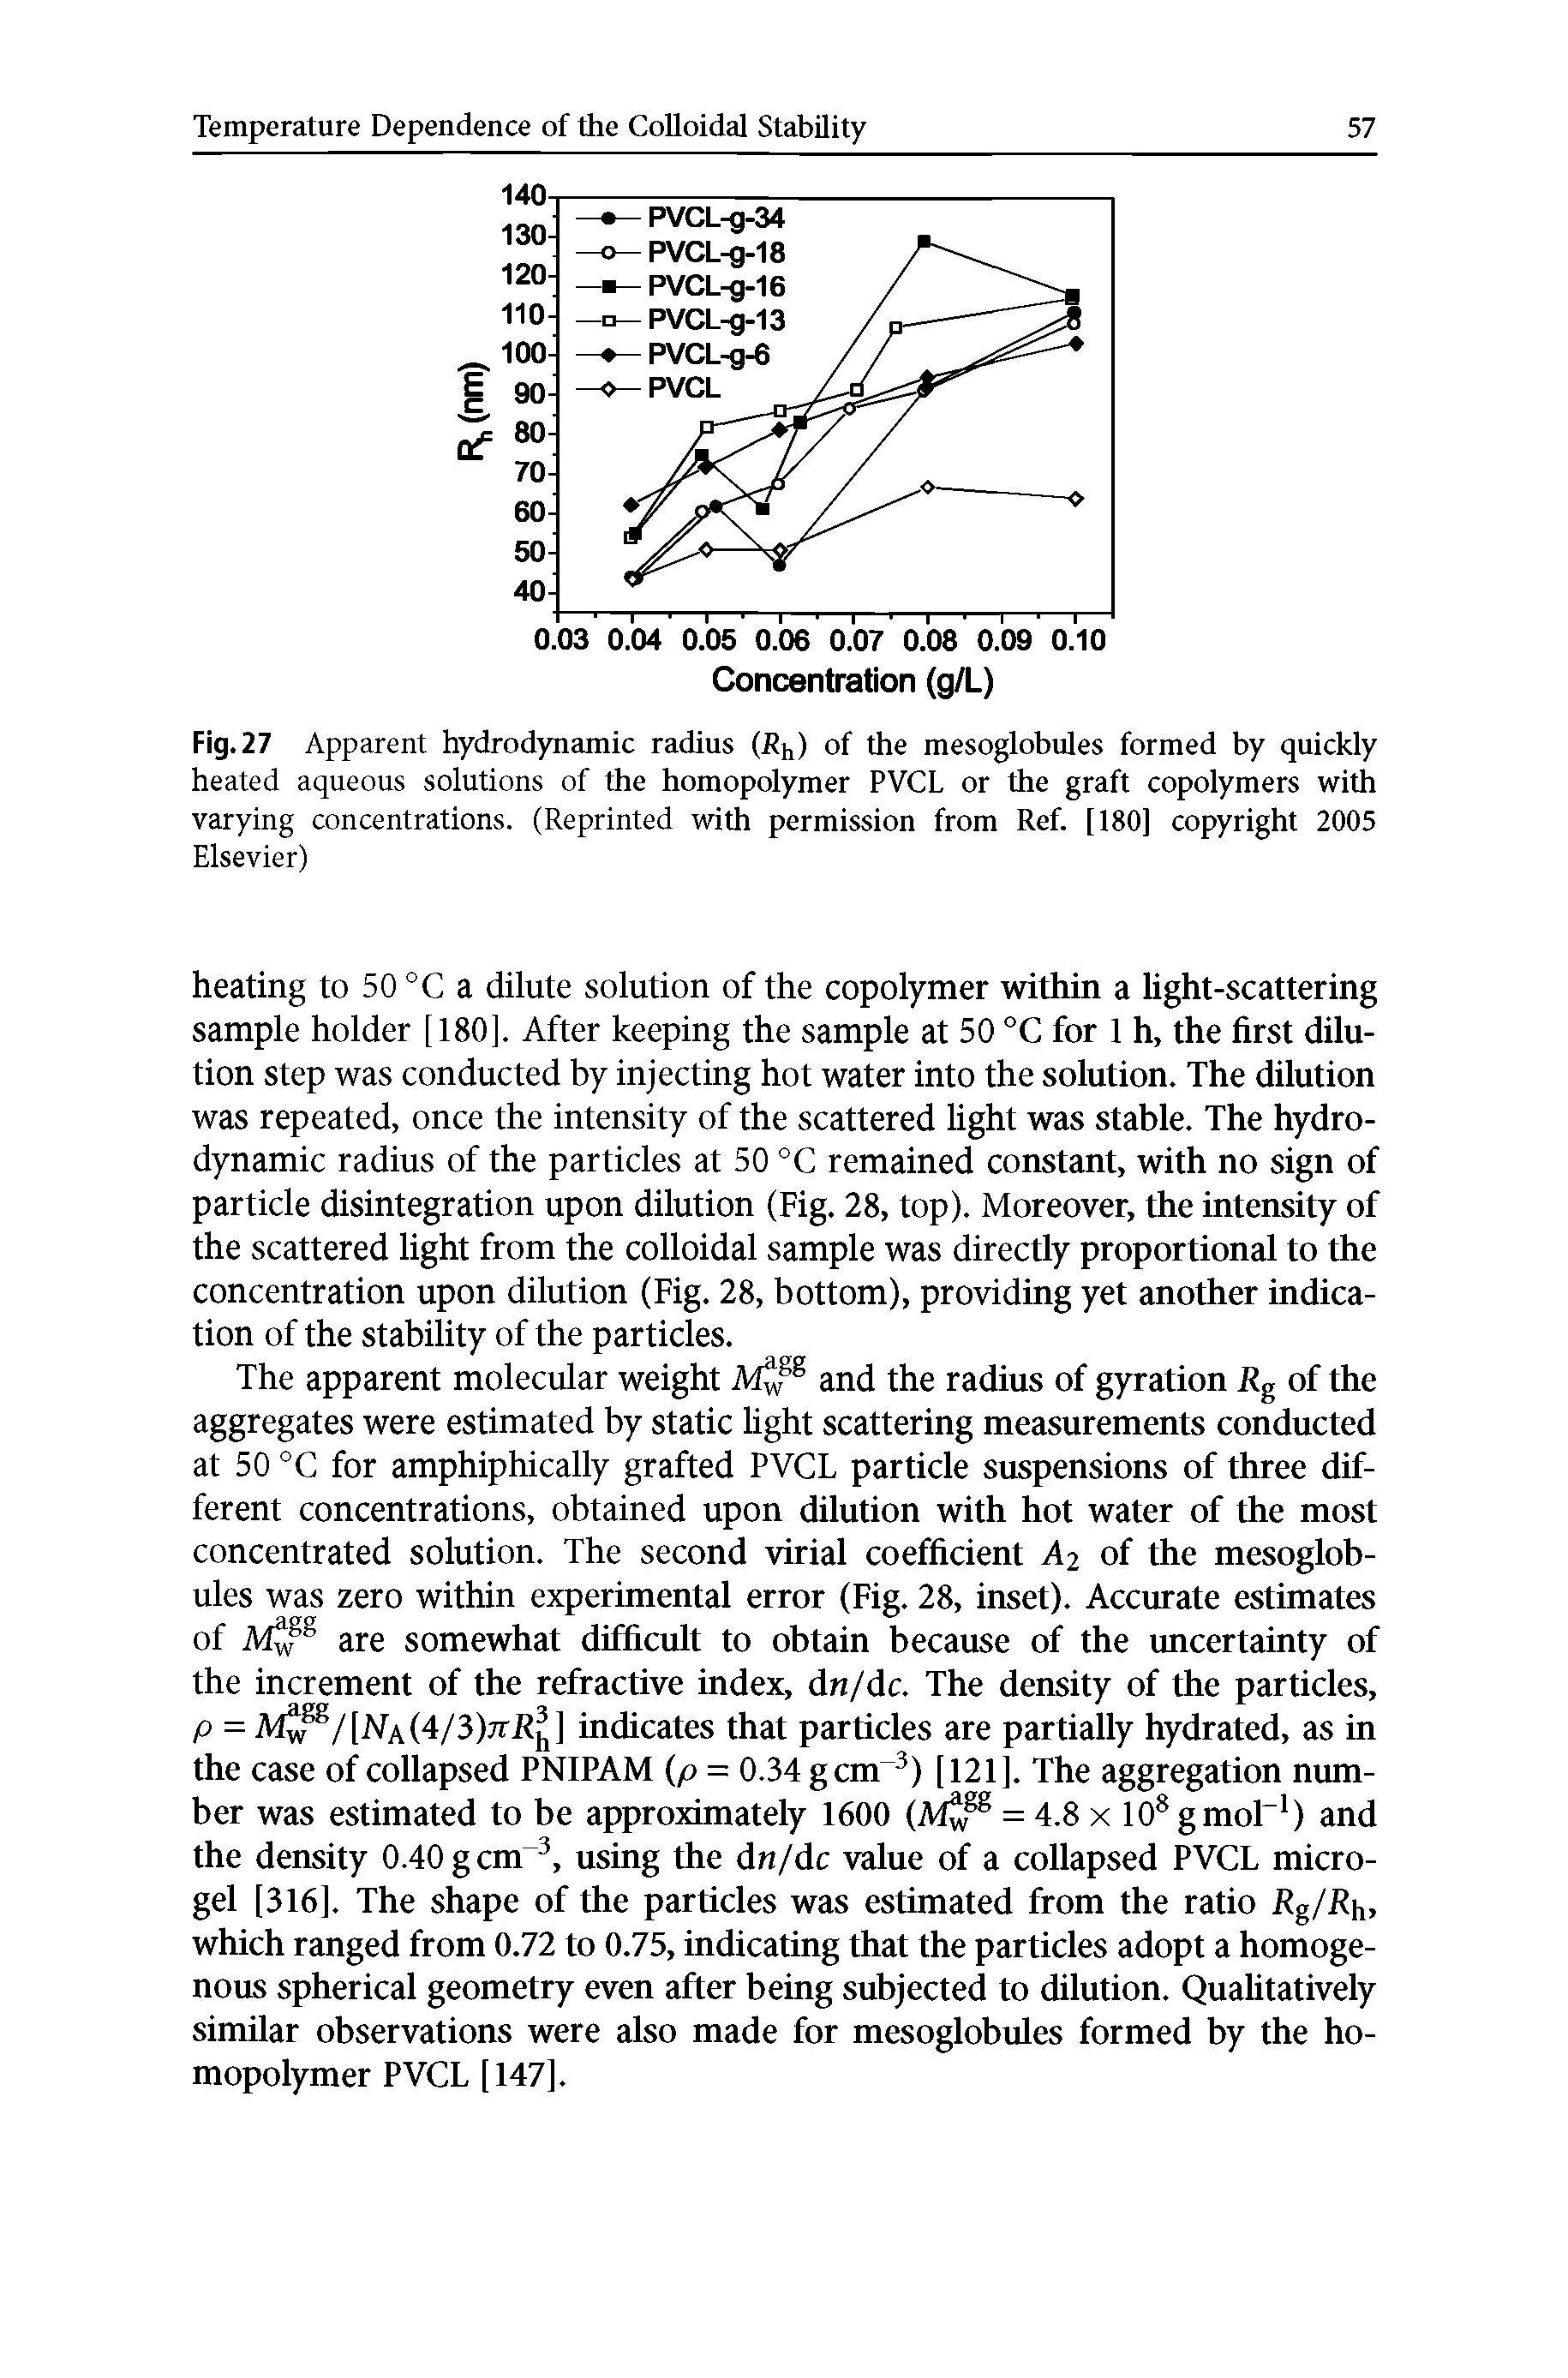 Fig. 27 Apparent hydrodynamic radius (Rh) of the mesoglobules formed by quickly heated aqueous solutions of the homopolymer PVCL or the graft copolymers with varying concentrations. (Reprinted with permission from Ref. [180] copyright 2005 Elsevier)...